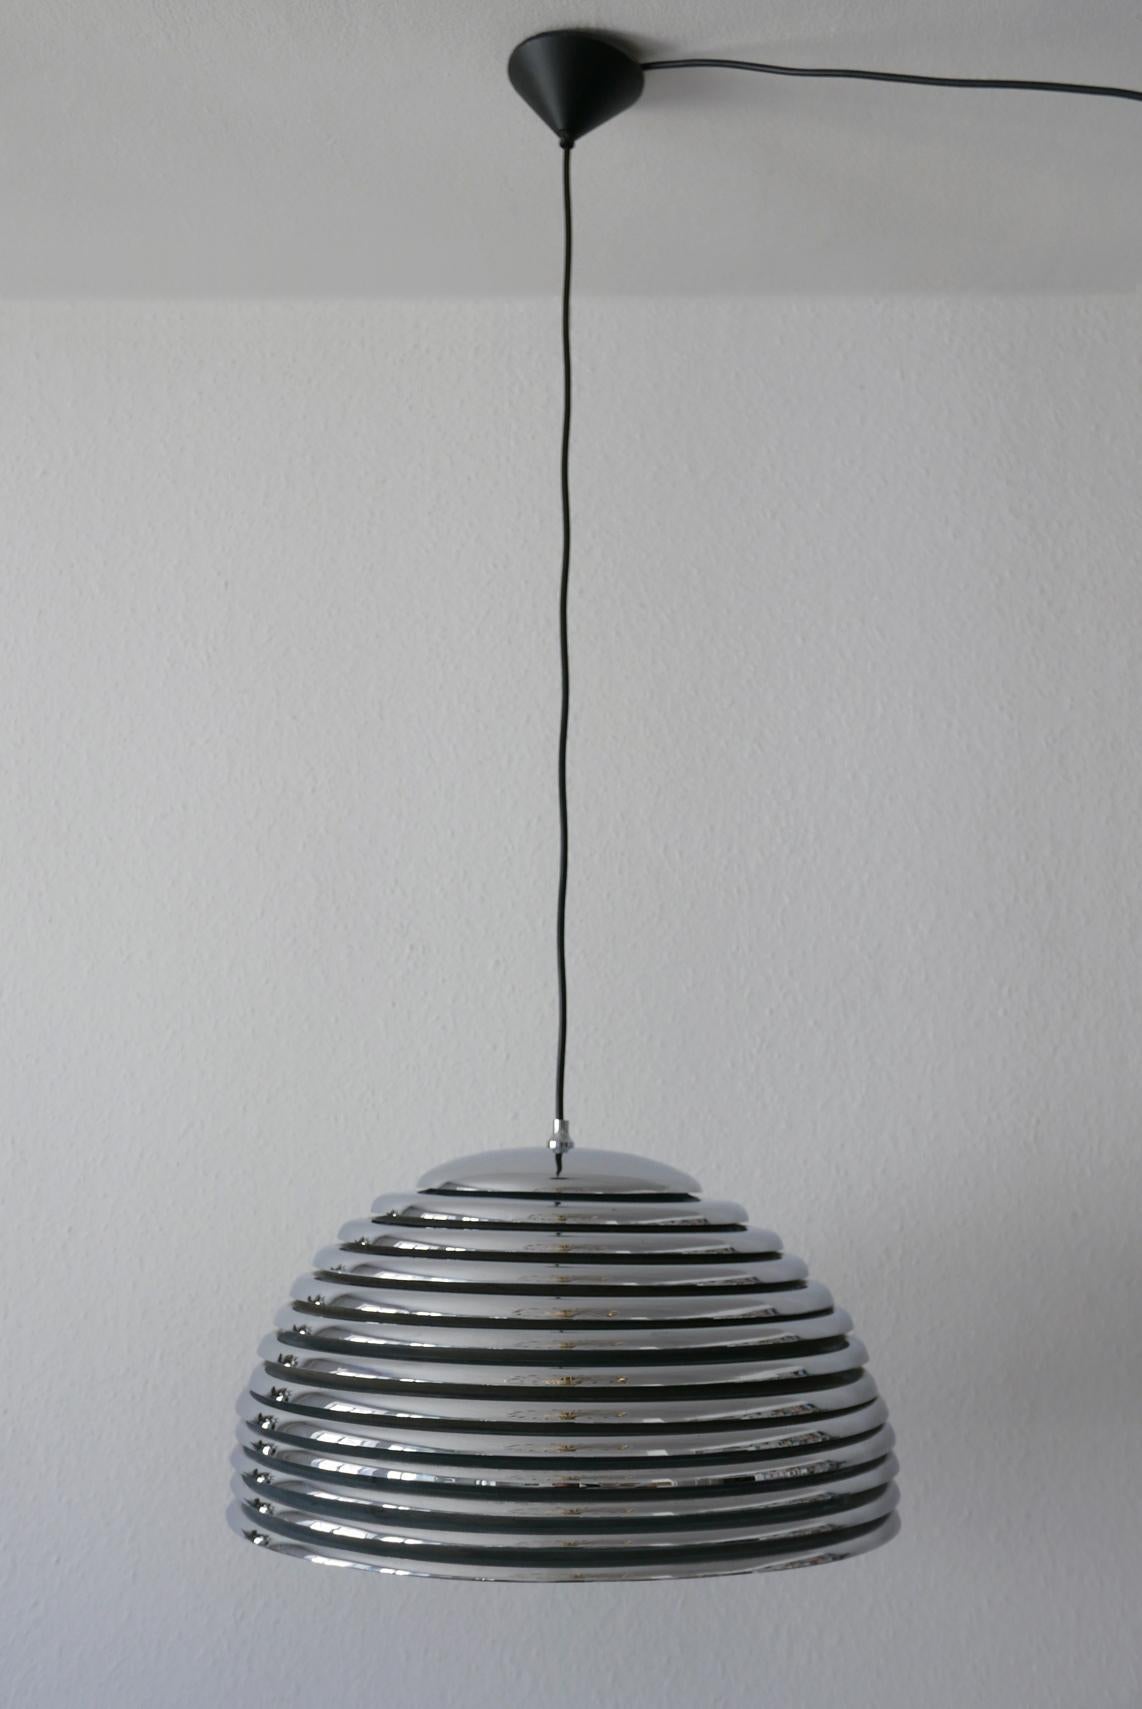 Elegant and large Mid-Century Modern 'Saturno' pendant lamp by Kazuo Motozawa for staff, 1960s, Germany. IF design awarded in 1972.

Executed in chrome-plated metal. It needs 4 x E27 Edison screw fit bulbs. It runs both on 110 / 230